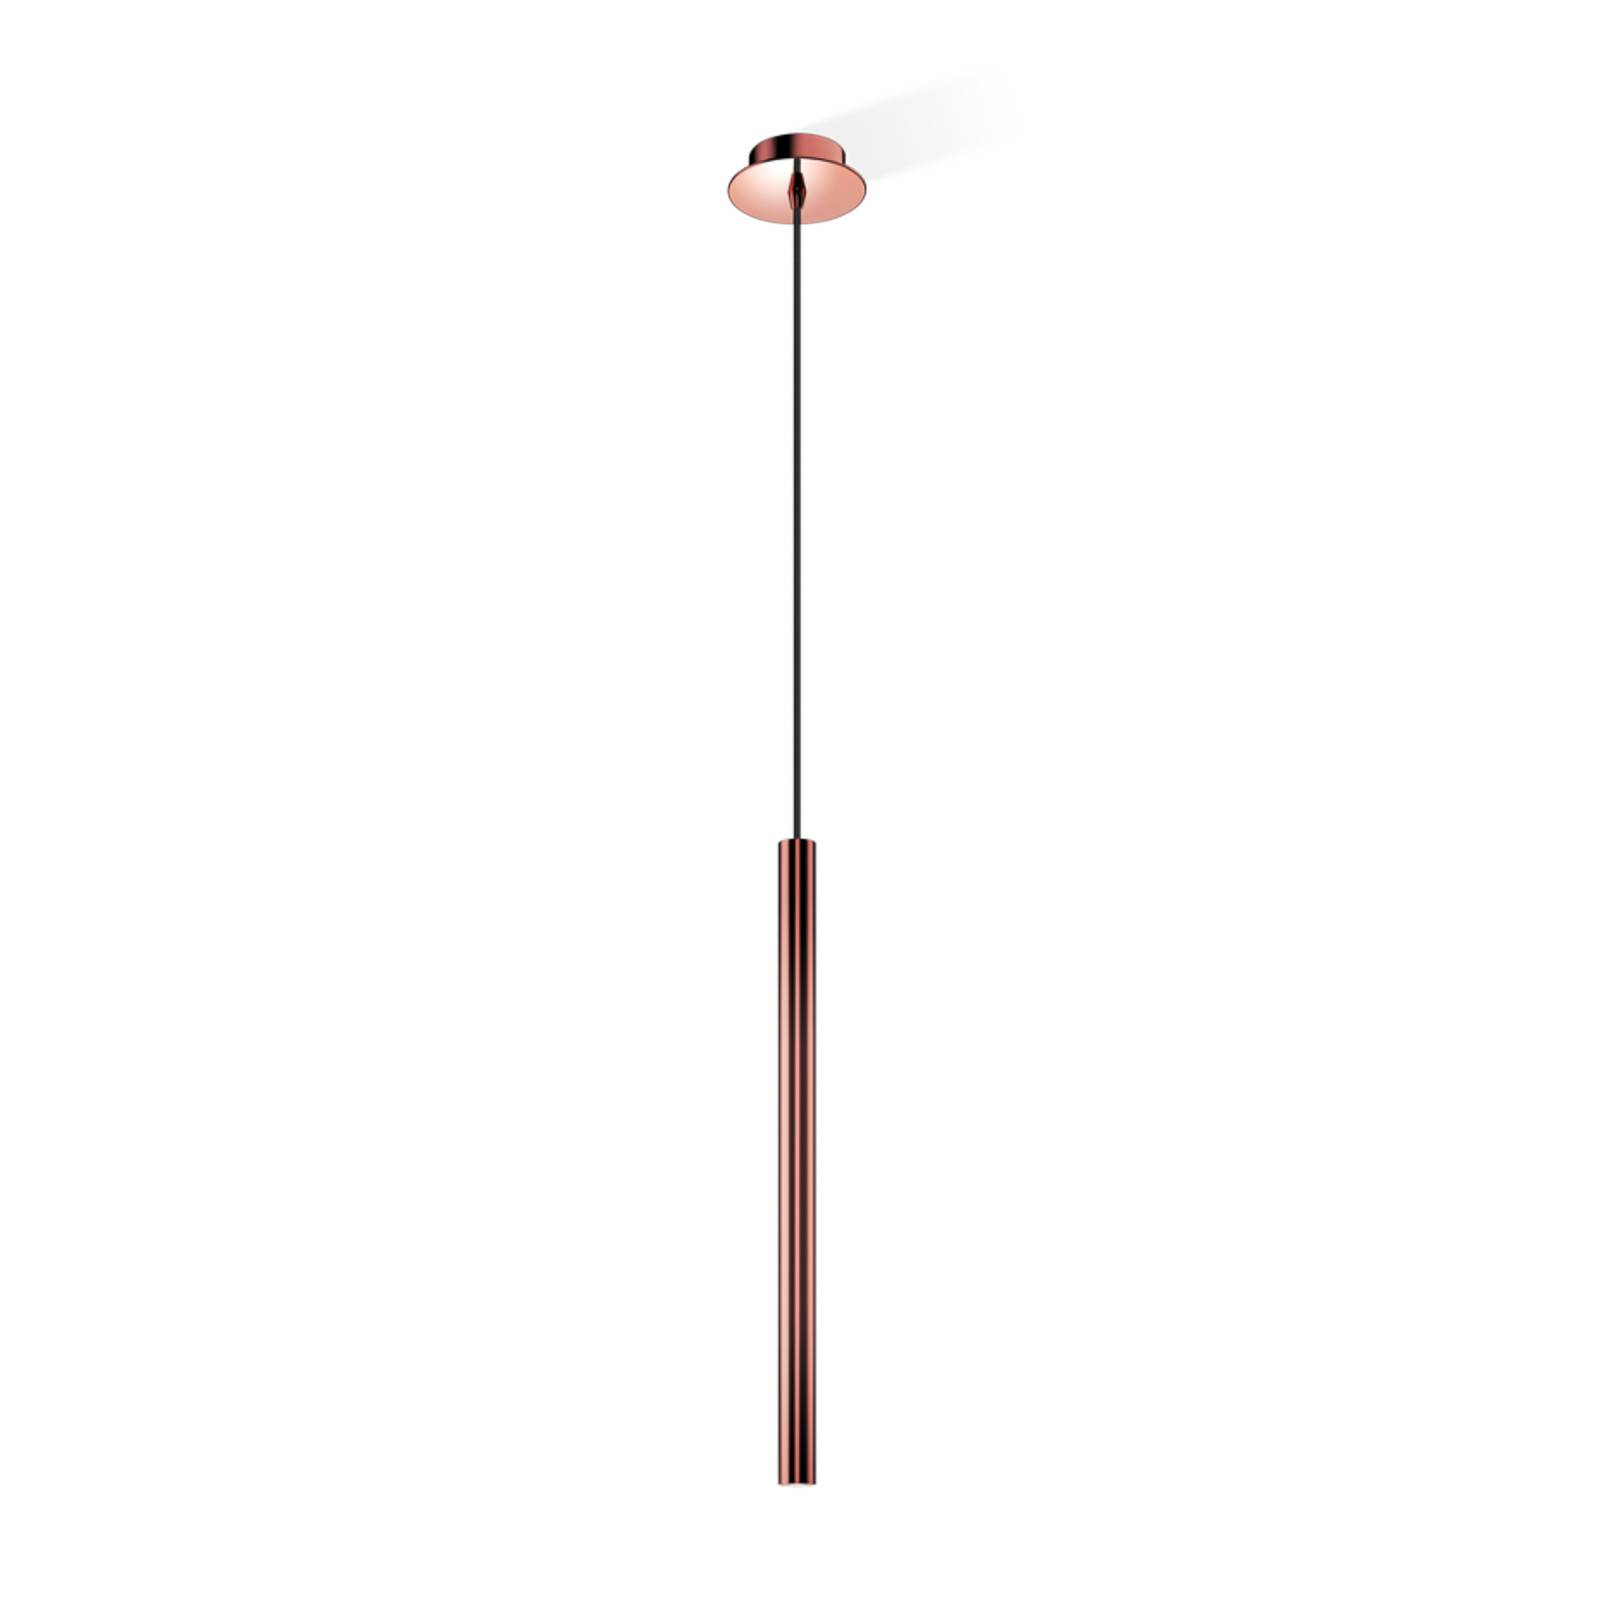 Decor Walther Pipe 1 LED-Pendelleuchte, rosegold von Decor Walther